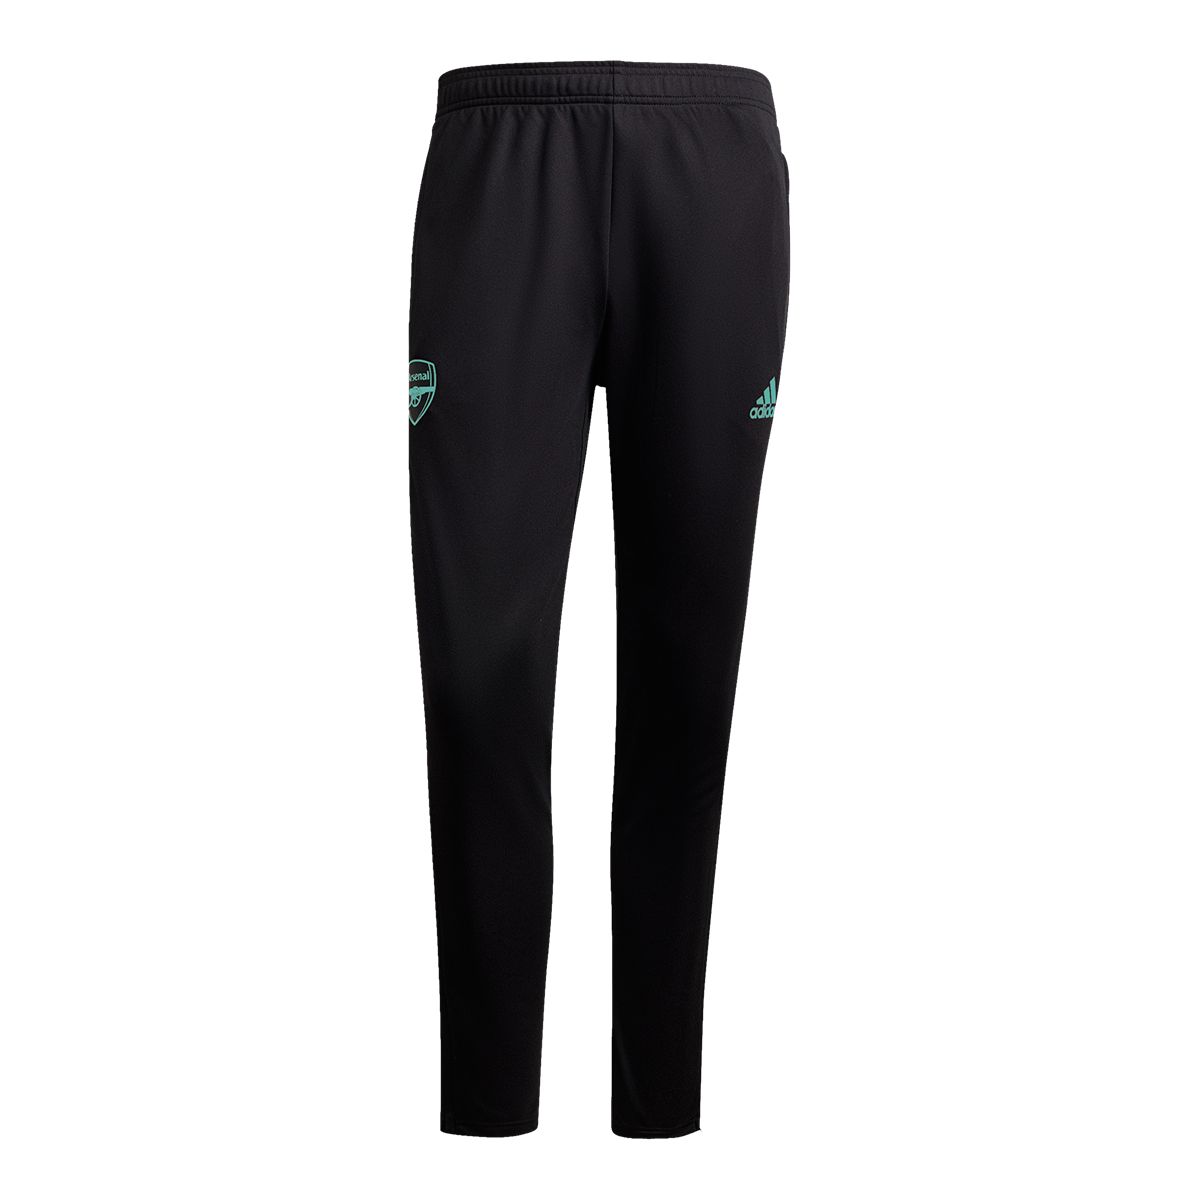 Arsenal Leisure Black Tricot Pants | Official Online Store